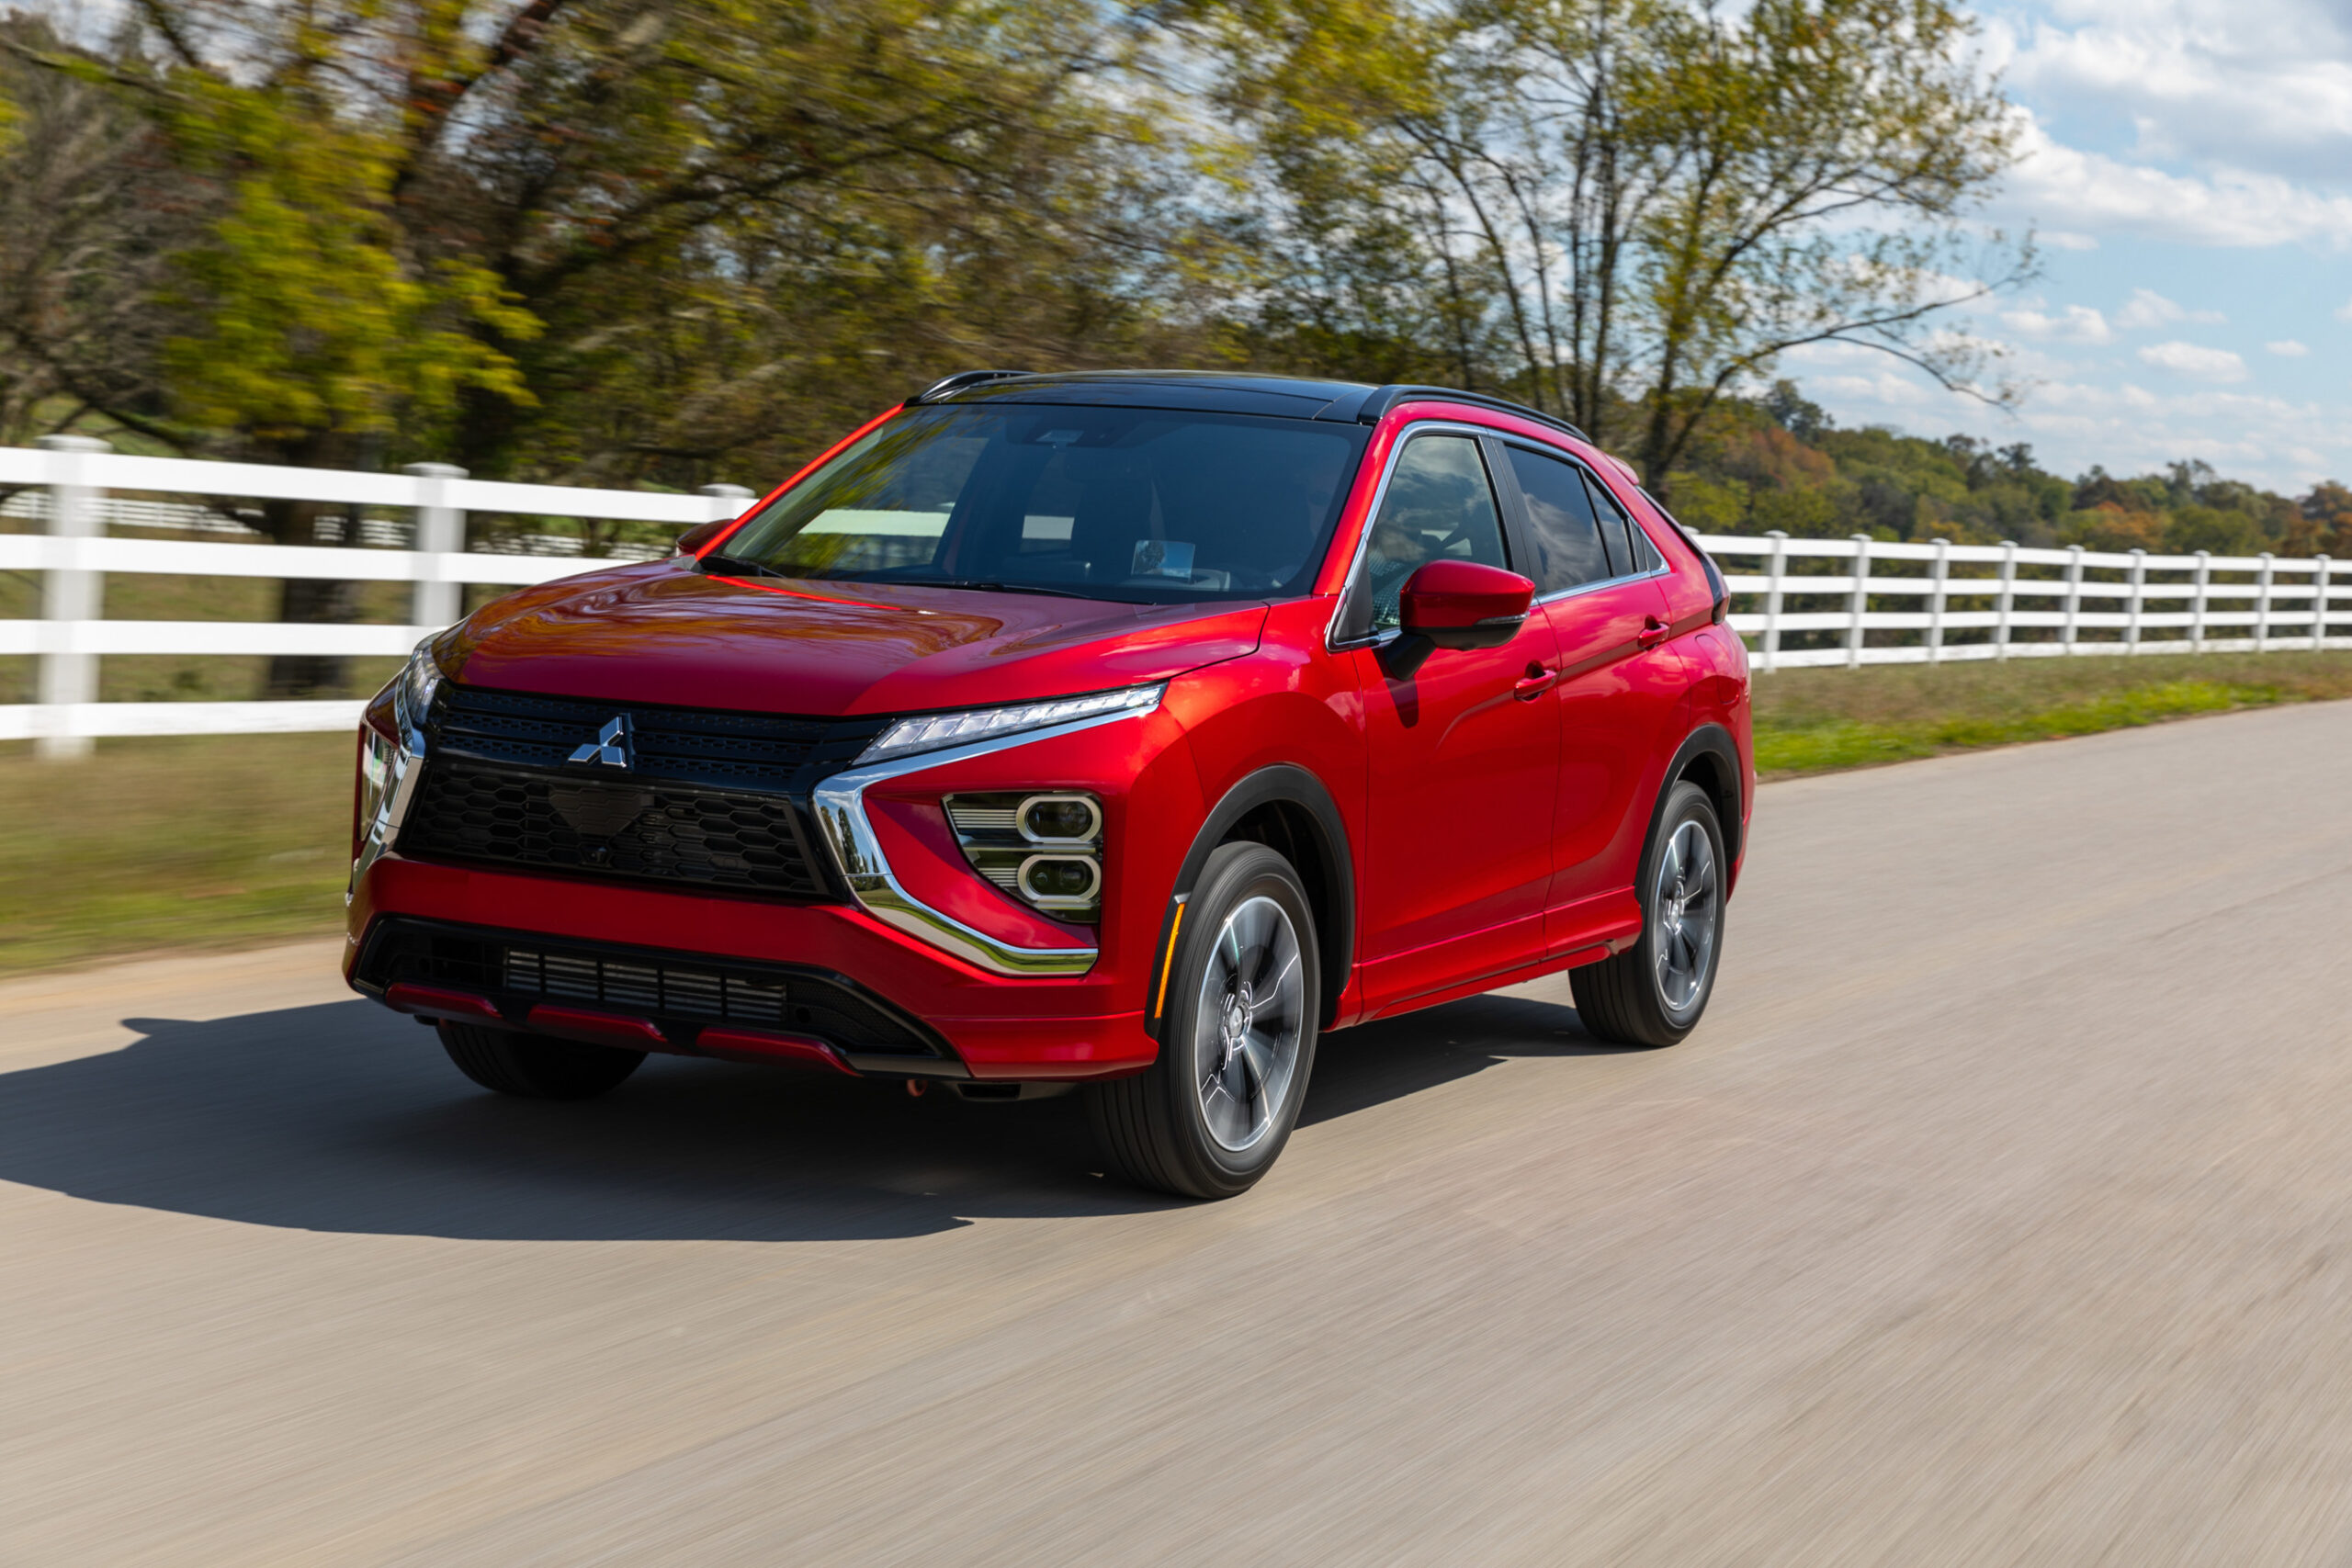 Redesigned 2022 Mitsubishi Eclipse Cross Achieves 5-Star Overall Safety Rating In NHTSA Crash Testing